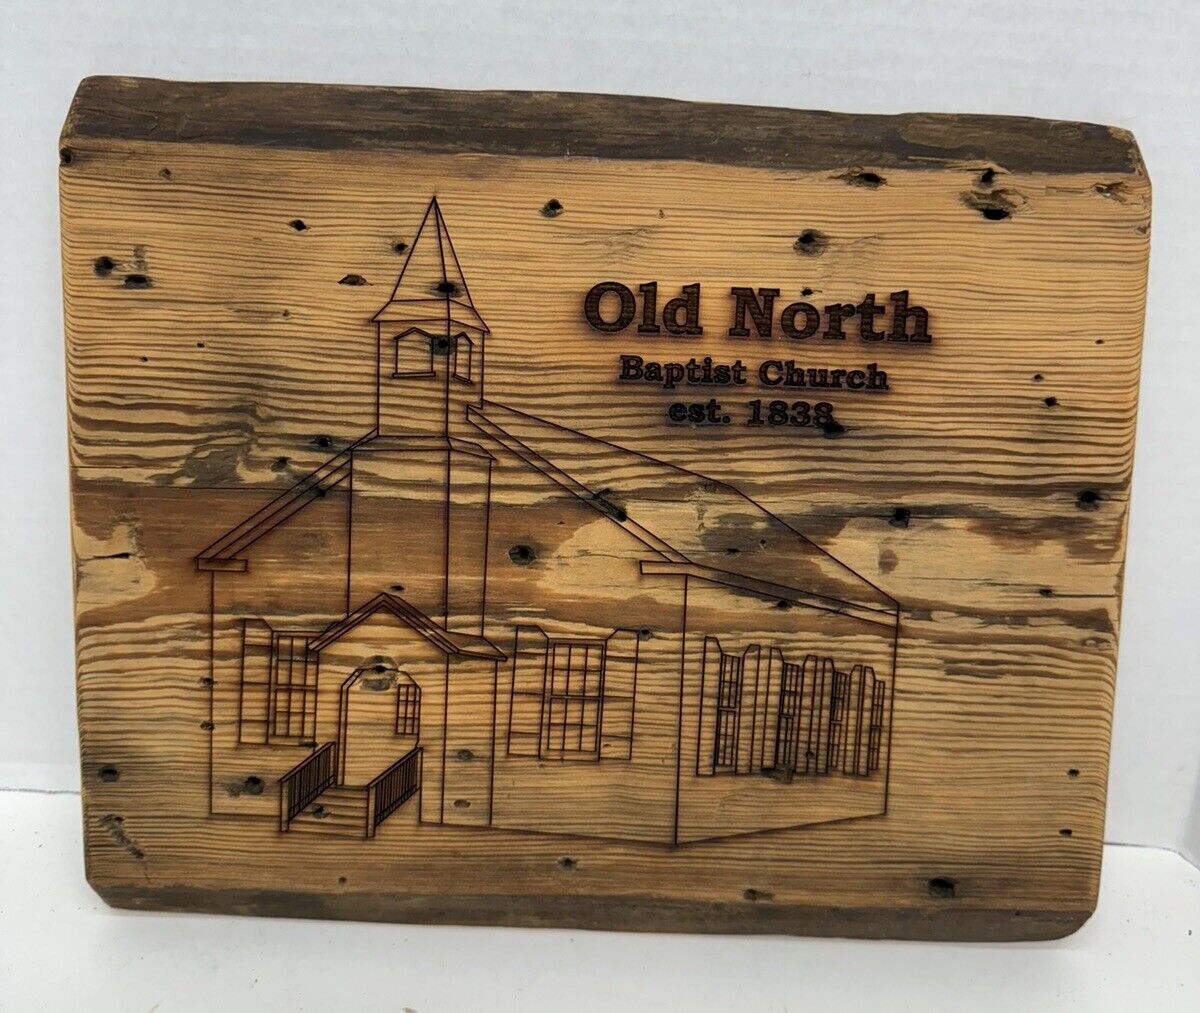 Old North Baptist Church Nacogdoches plaque reclaimed wood 1838